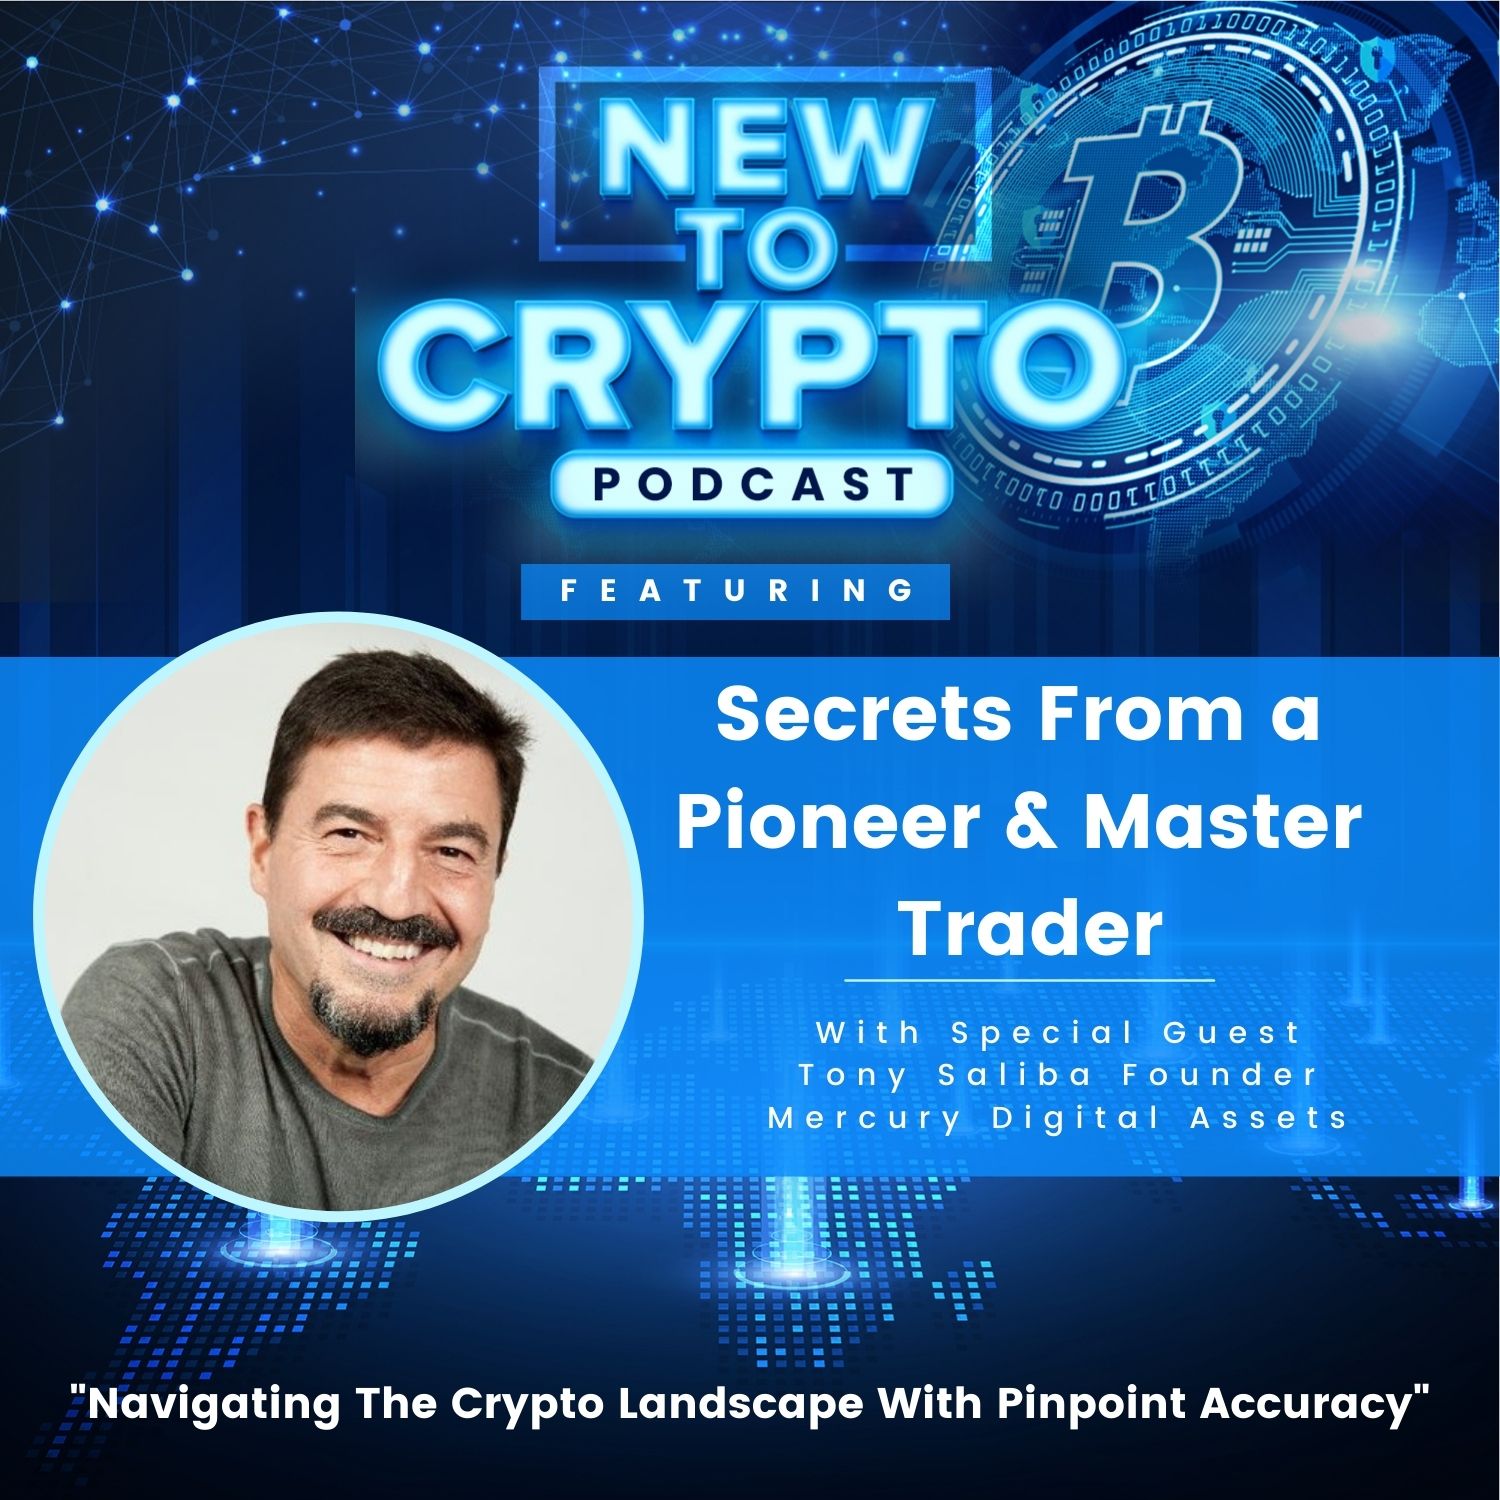 Secrets From a Pioneer & Master Trader With Tony Saliba Founder of Mercury Digital Assets image